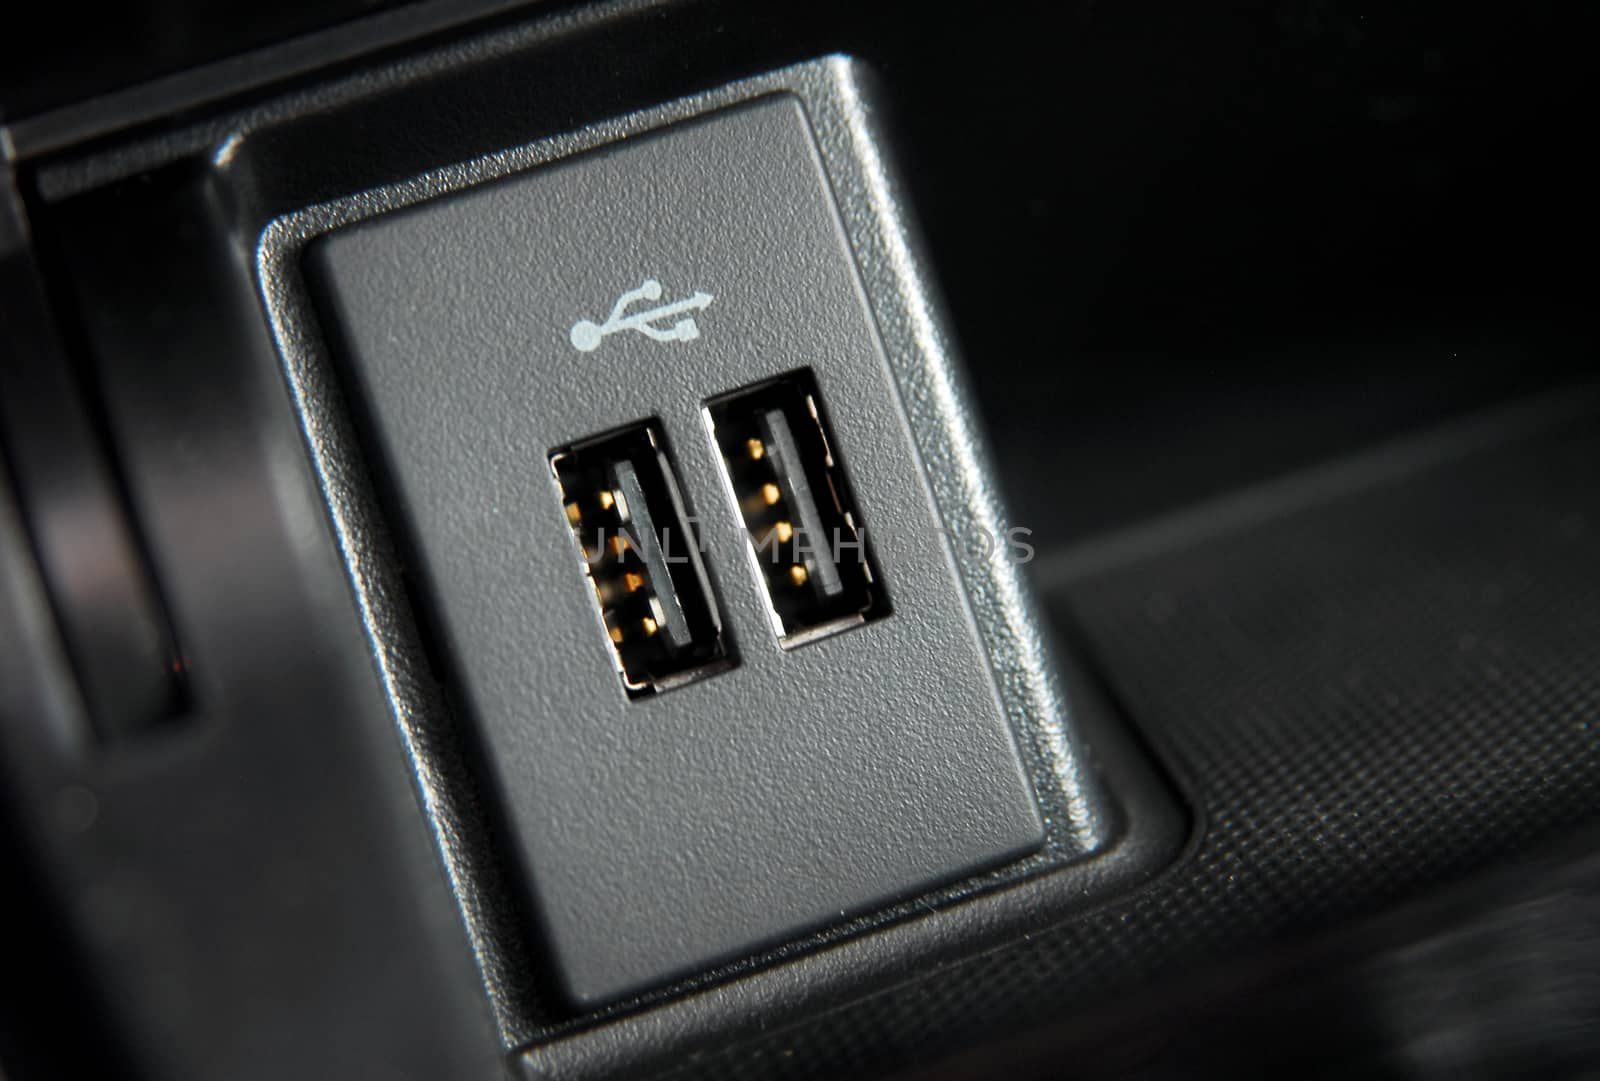 two usb ports on the dashboard of a modern passenger car